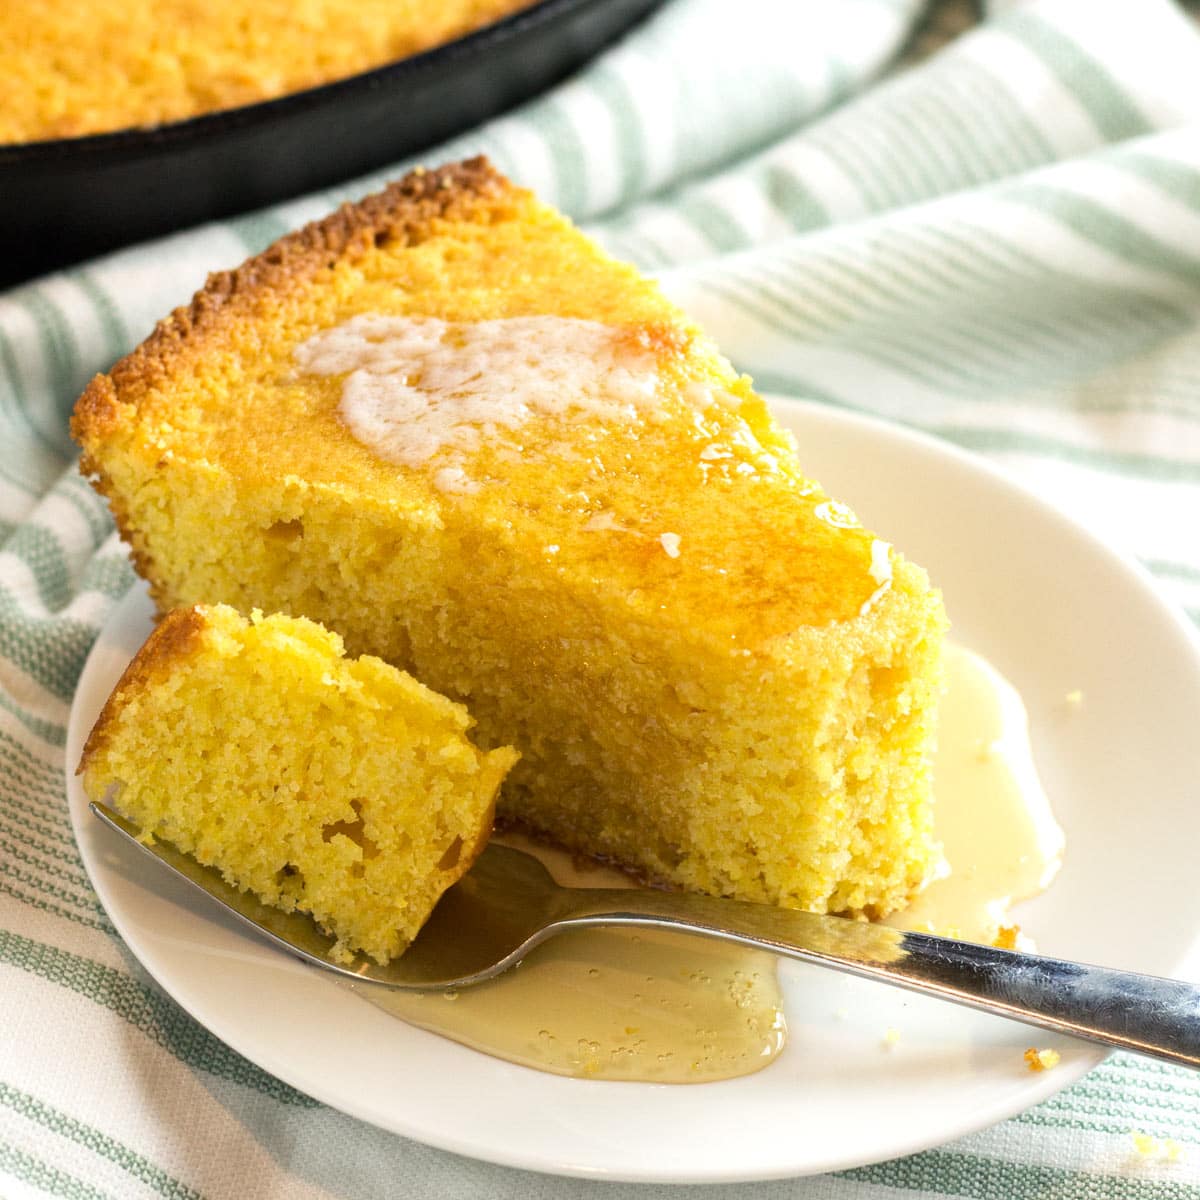 How to Make Corn Bread Moist and Fluffy Every Time in 4 Simple Steps